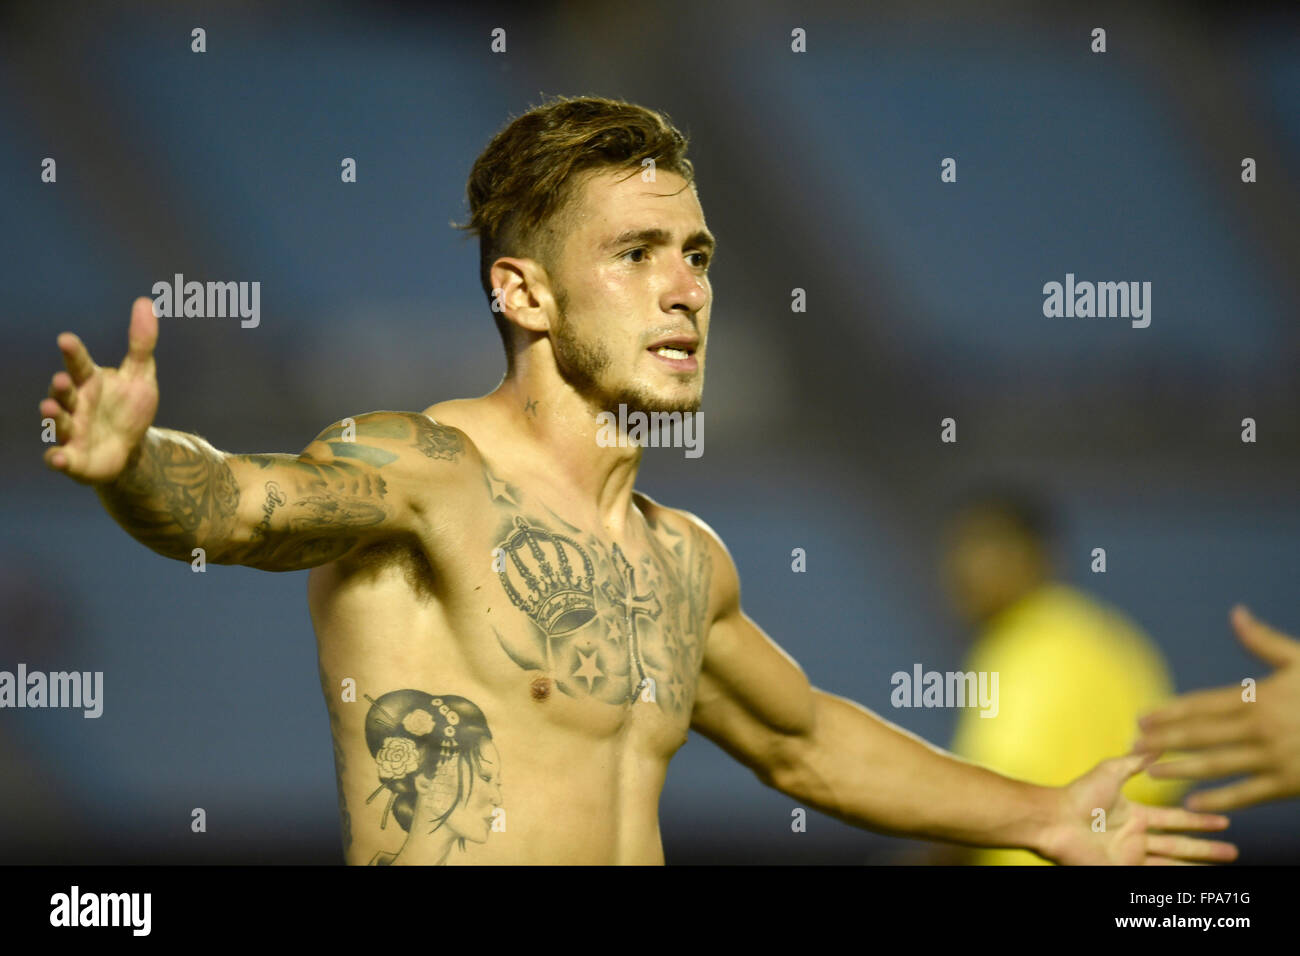 Montevideo, Uruguay. 17th Mar, 2106. Jonas Aguirre of Argentina's Rosario Central celebrates after scoring during the Group 2 match of the Libertadores Cup, against Uruguay's River Plate, held at Centenario Stadium in Montevideo, capital of Uruguay, on March 17, 2106. Rosario Central won by 3-1. © Nicolas Celaya/Xinhua/Alamy Live News Stock Photo